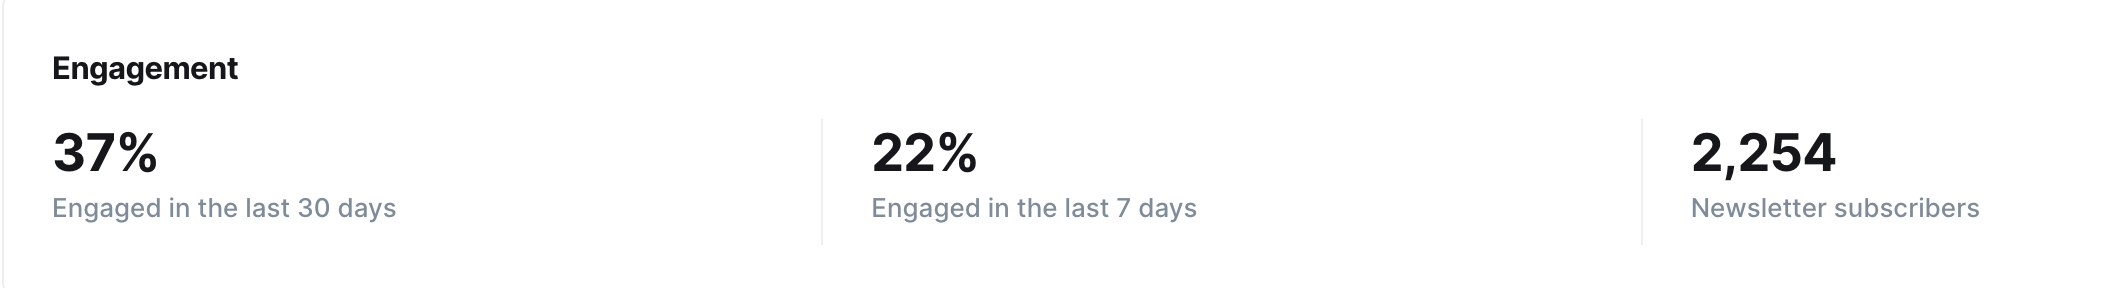 Image says engagement 37% engaged in the last 30 days, 22% engaged in the last 7 days and 2,254 newsletter subscribers